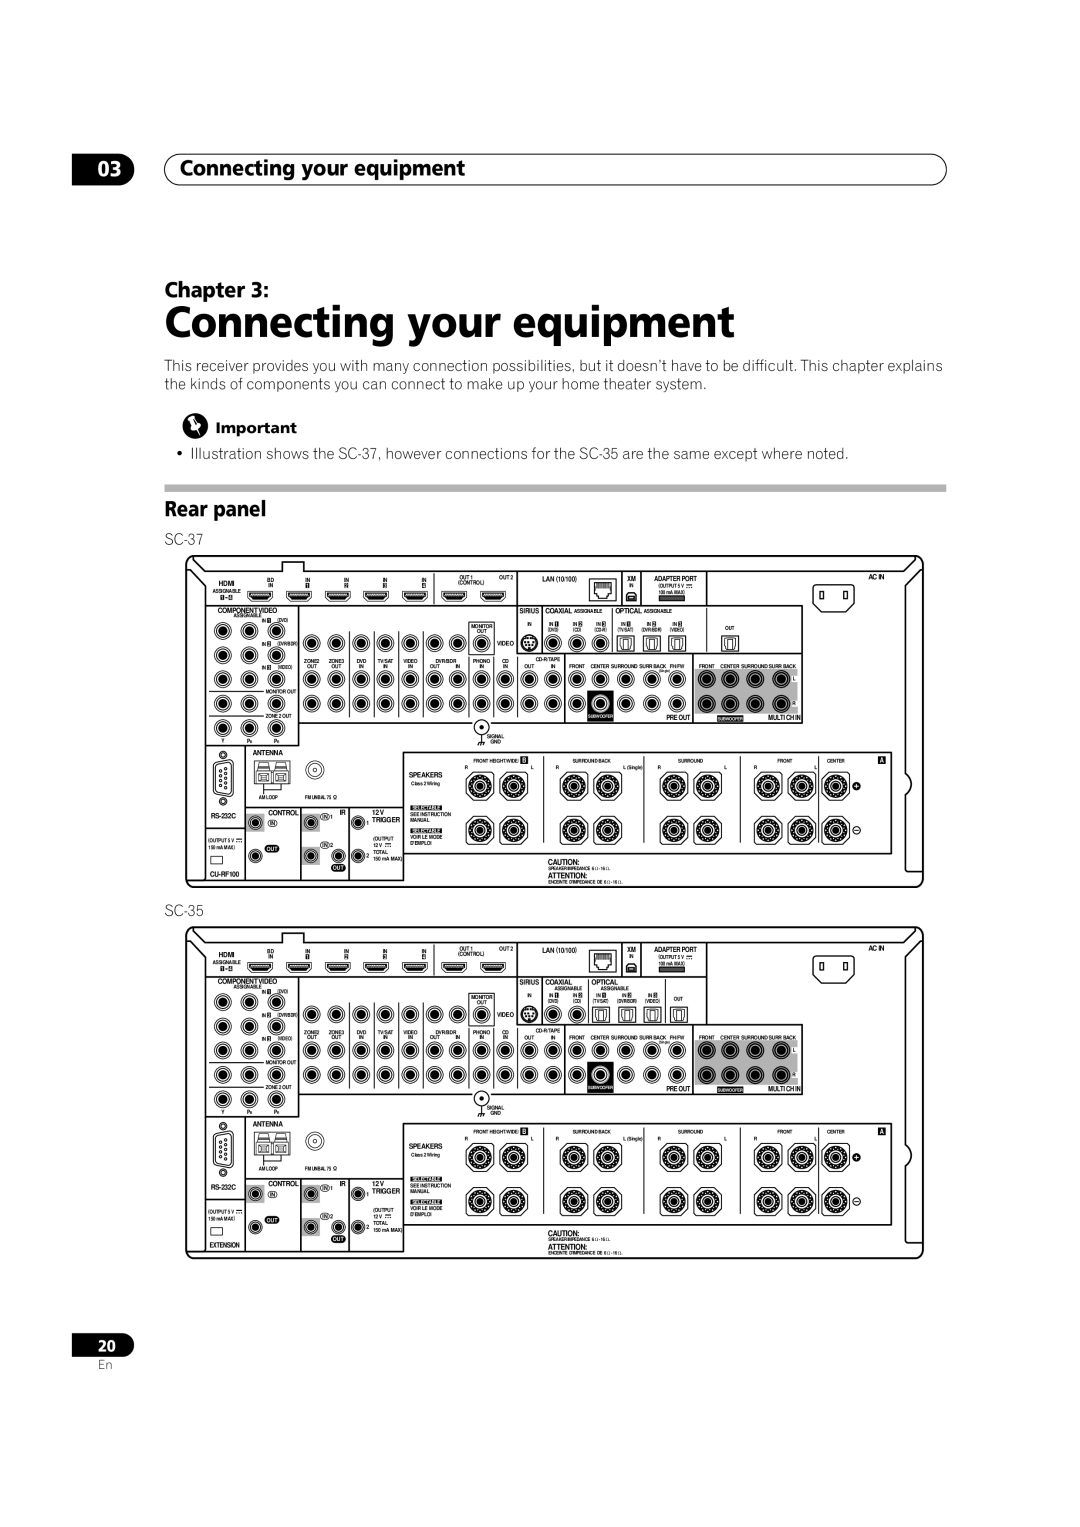 Pioneer SC-35 manual 03Connecting your equipment Chapter, Rear panel 